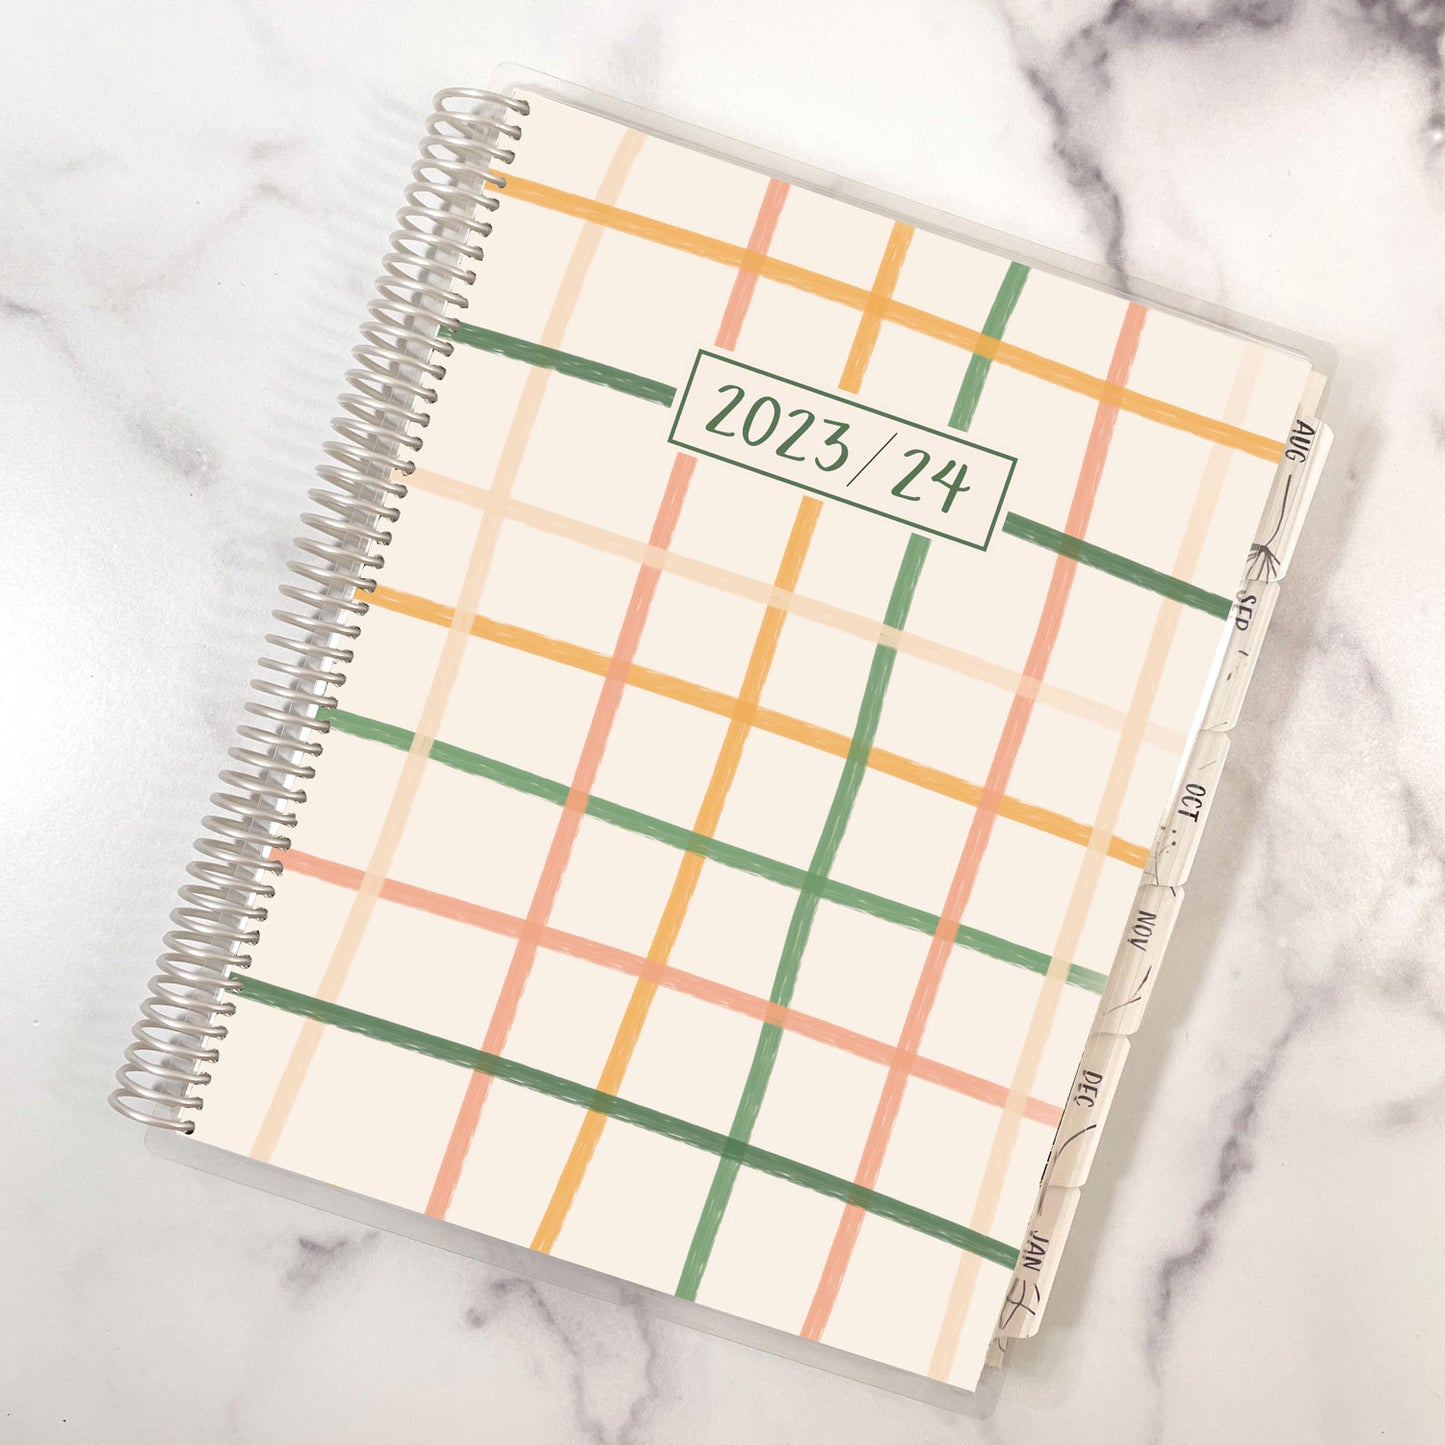 2023-2024 Weekly Planner - Lizzy